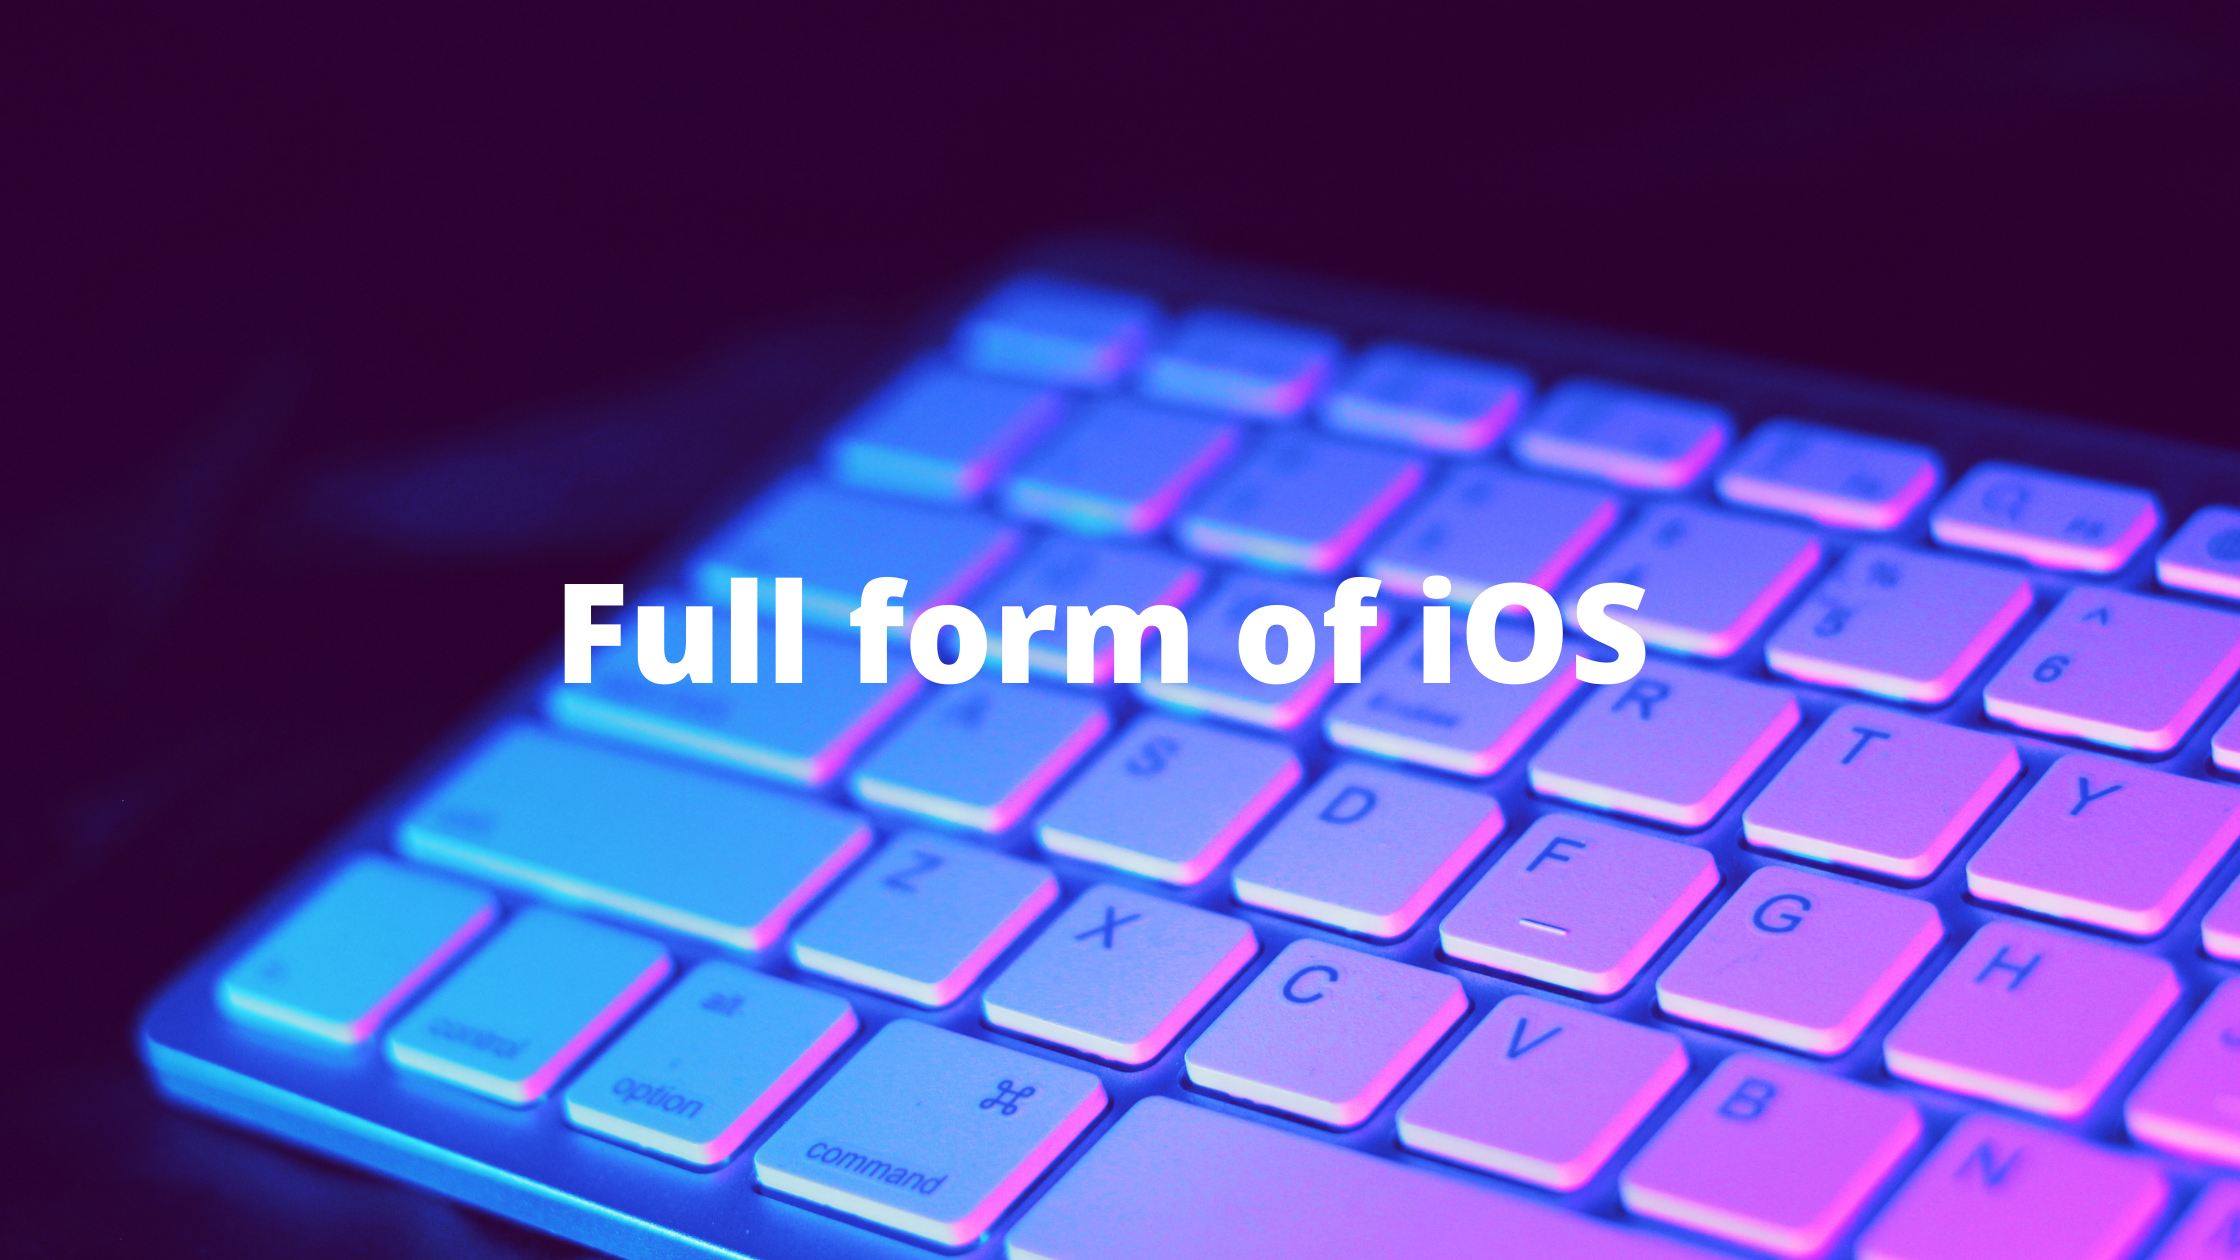 In Full || The Full Form Of IOS (What That Means For You)